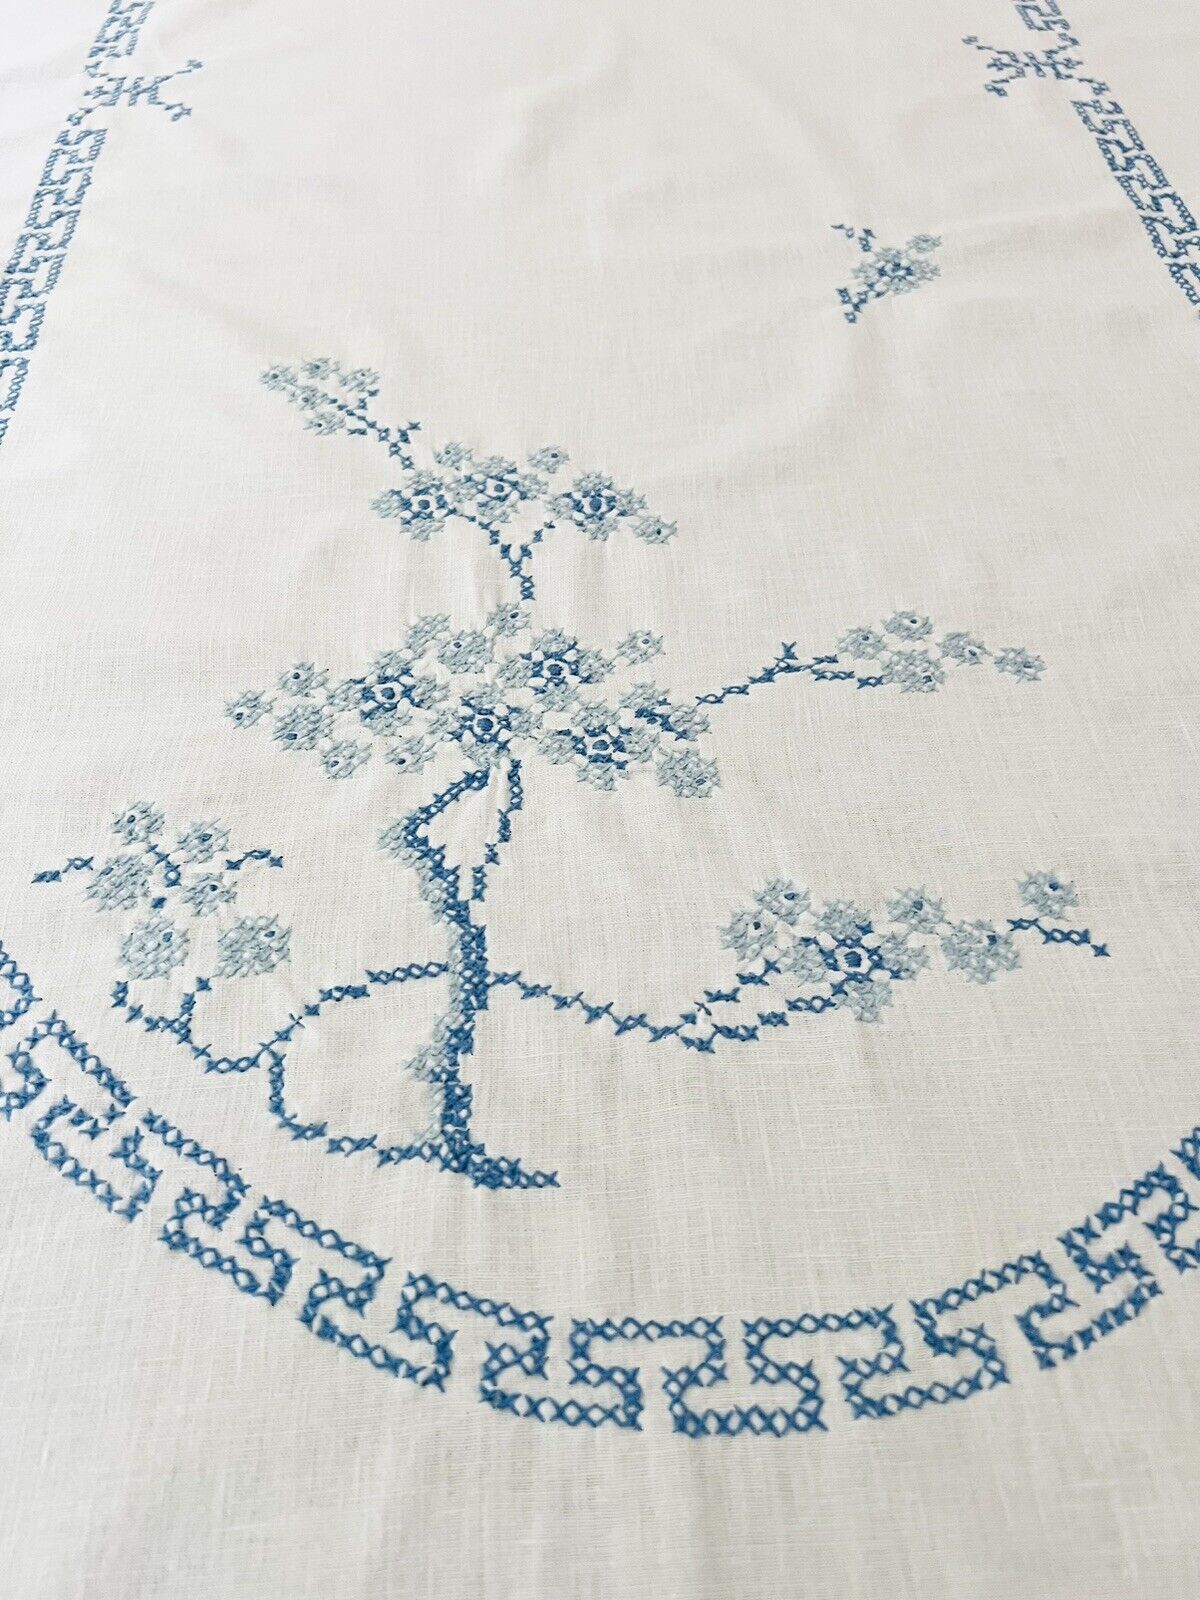 Large oval hand embroidered tablecloth blue & white,tree,blossoms, Greek Key